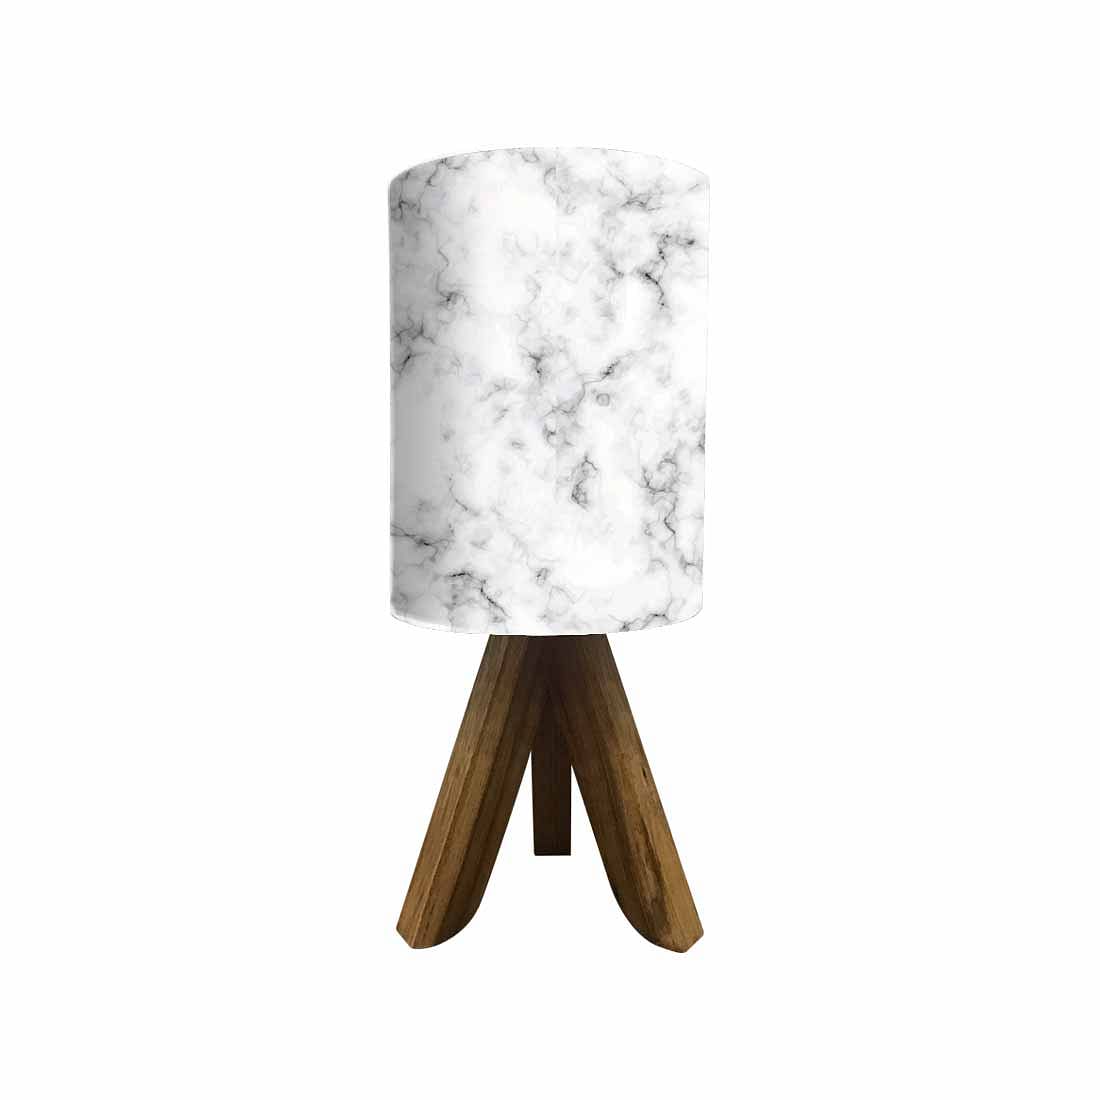 Handmade Wooden Table Lamps For Bedroom - Marble Effect Nutcase